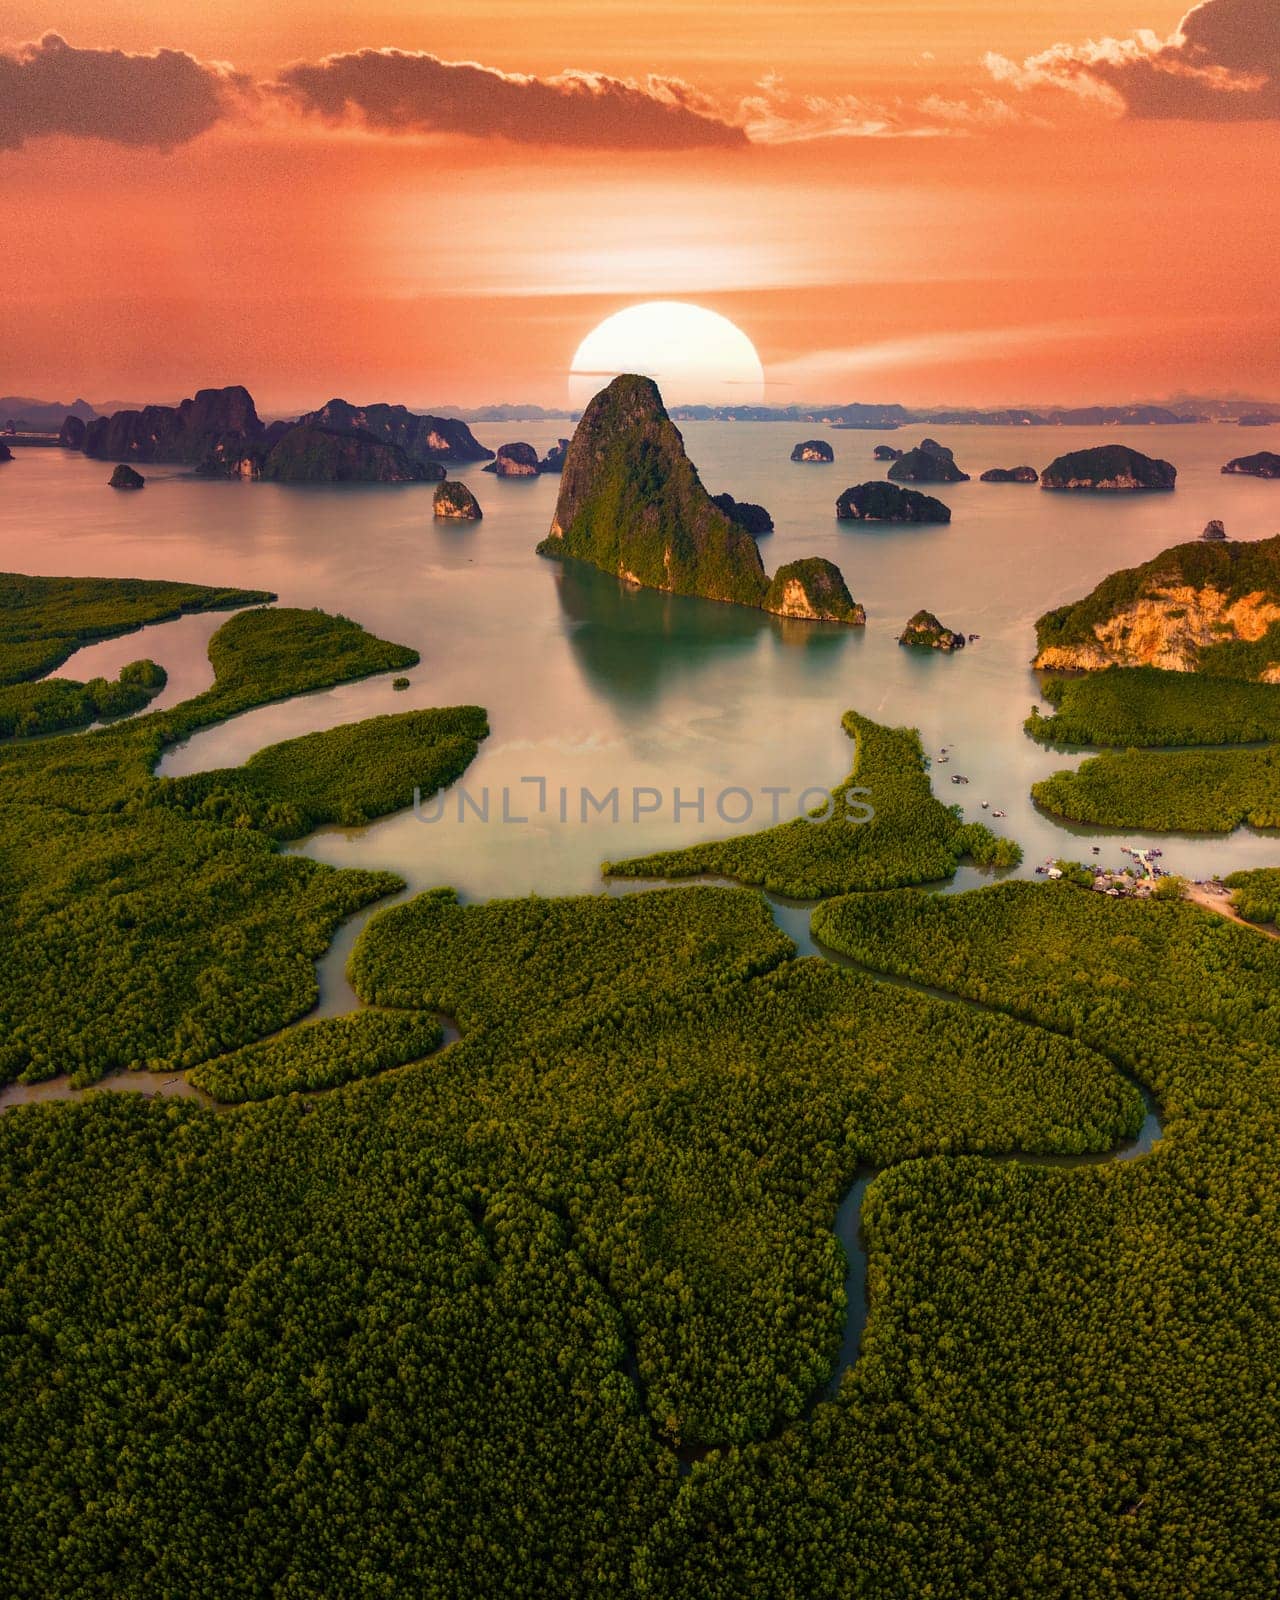 panorama view of Sametnangshe, view of mountains in Phangnga Bay with mangrove forest in the Andaman Sea with evening twilight sky, travel destination in Phangnga, Thailand